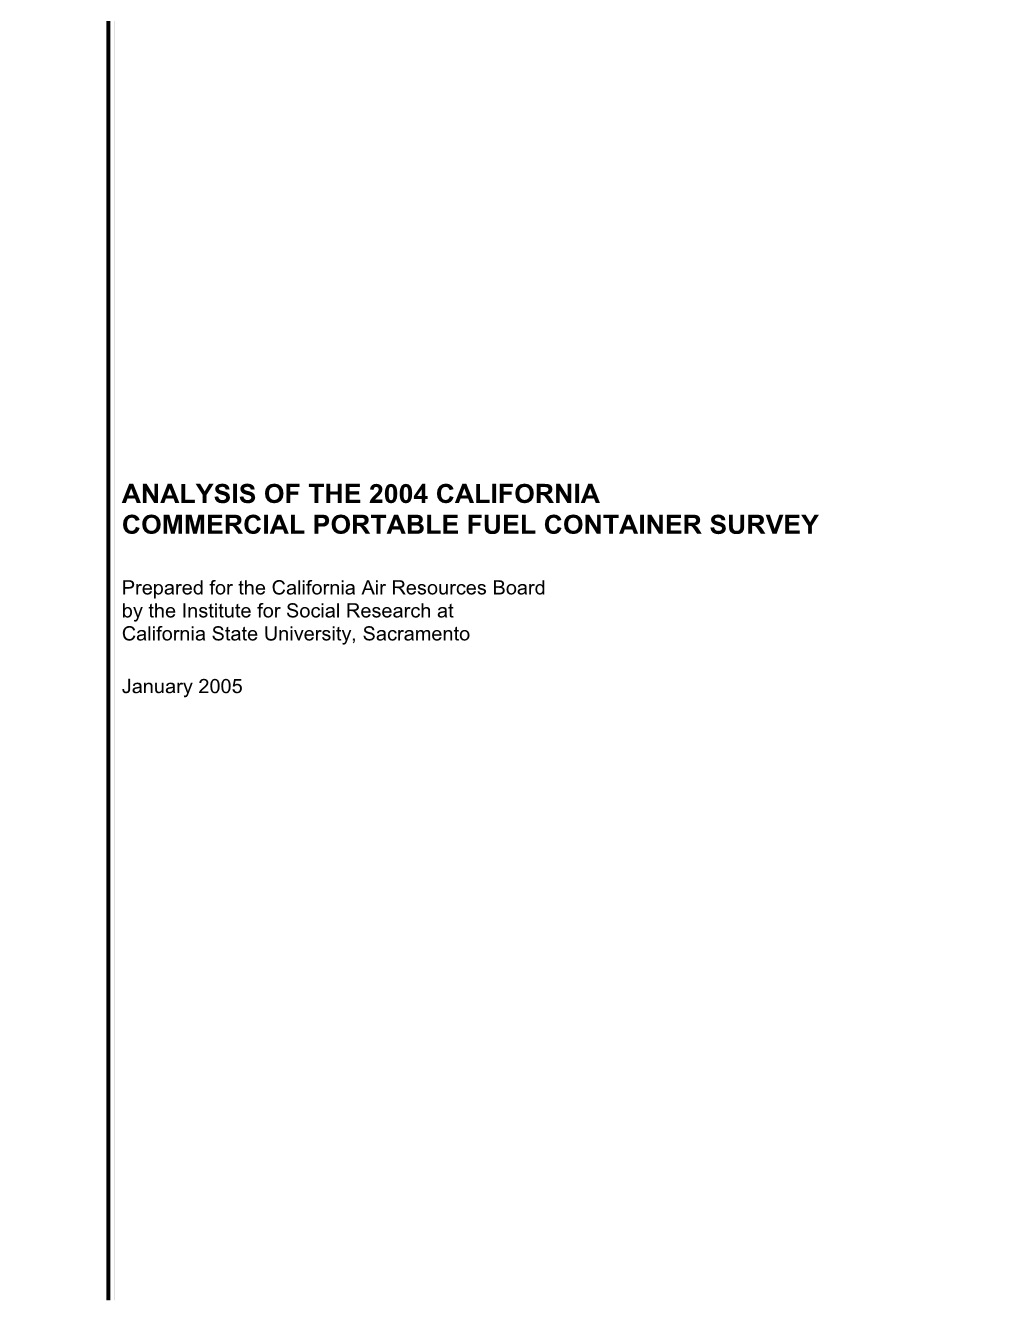 Analysis of the 2004 California Commercial Portable Fuel Container Survey